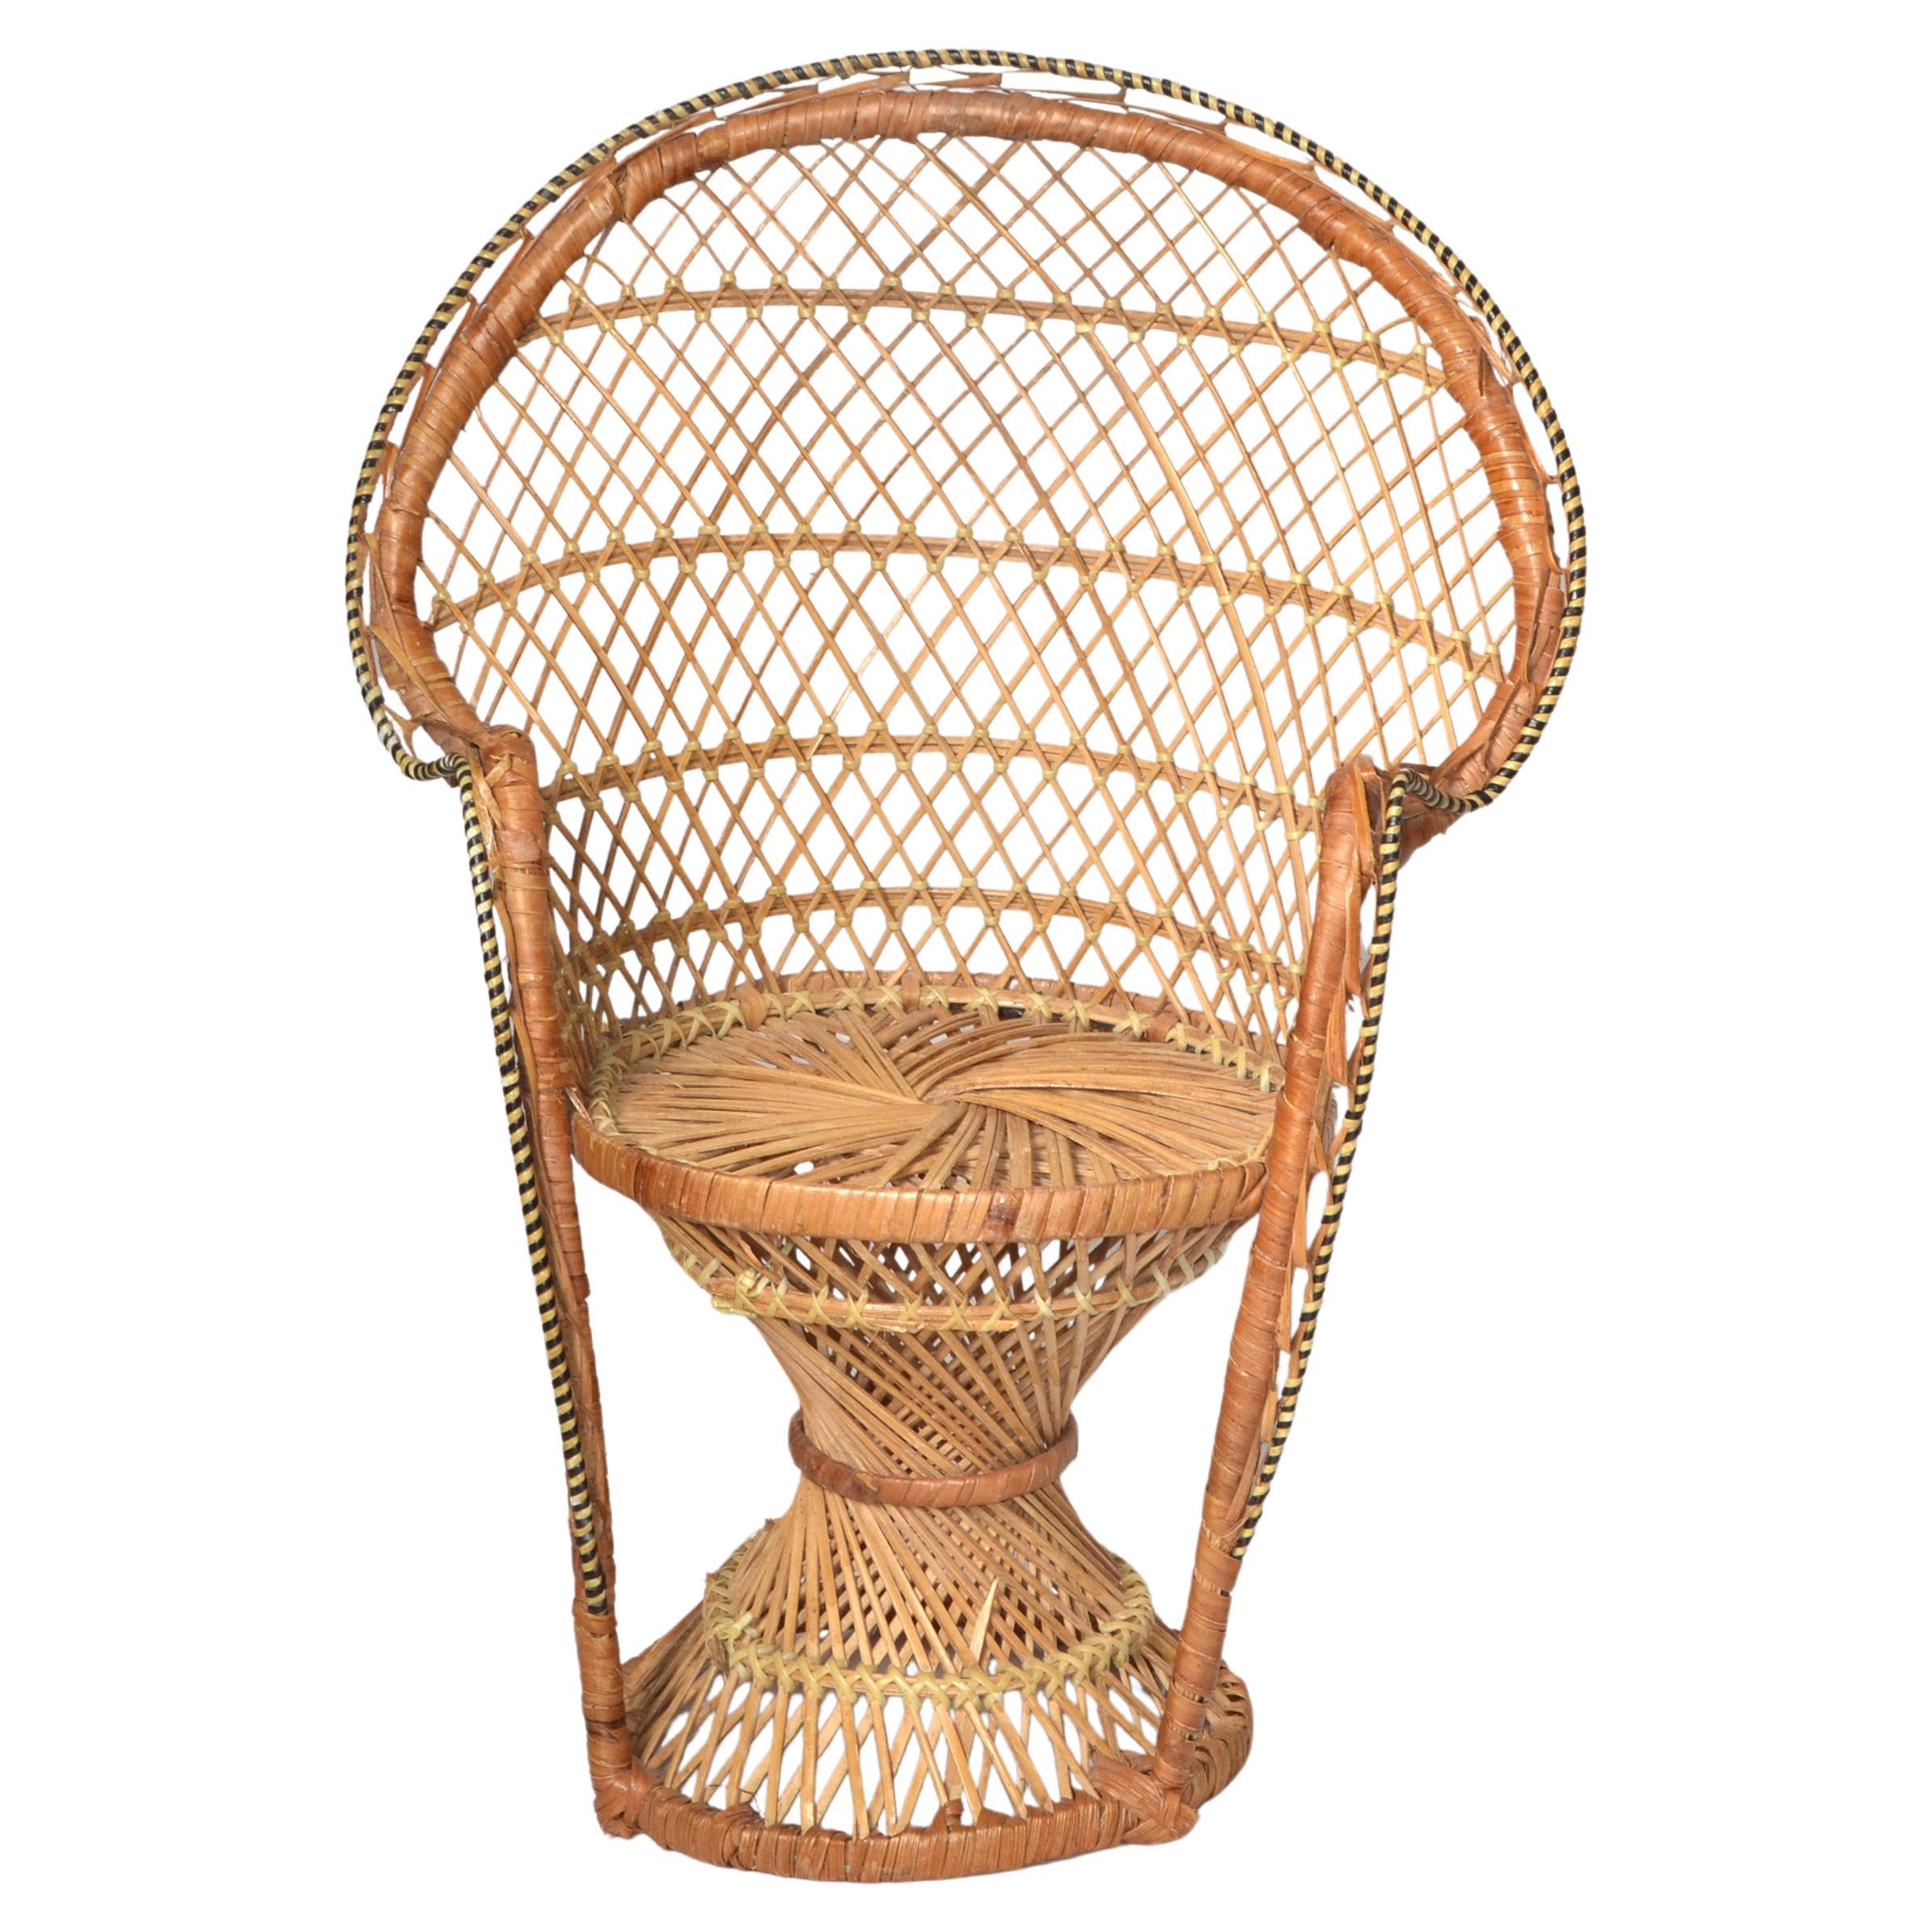 This Offer is the smallest Emmanuelle Wicker Rattan Armchair I have found so far.
It is made for display Your plant as plant stand, some may use it for Your Doll Collection. 
Well-crafted and firmly linked as the large ones.
This example is in good